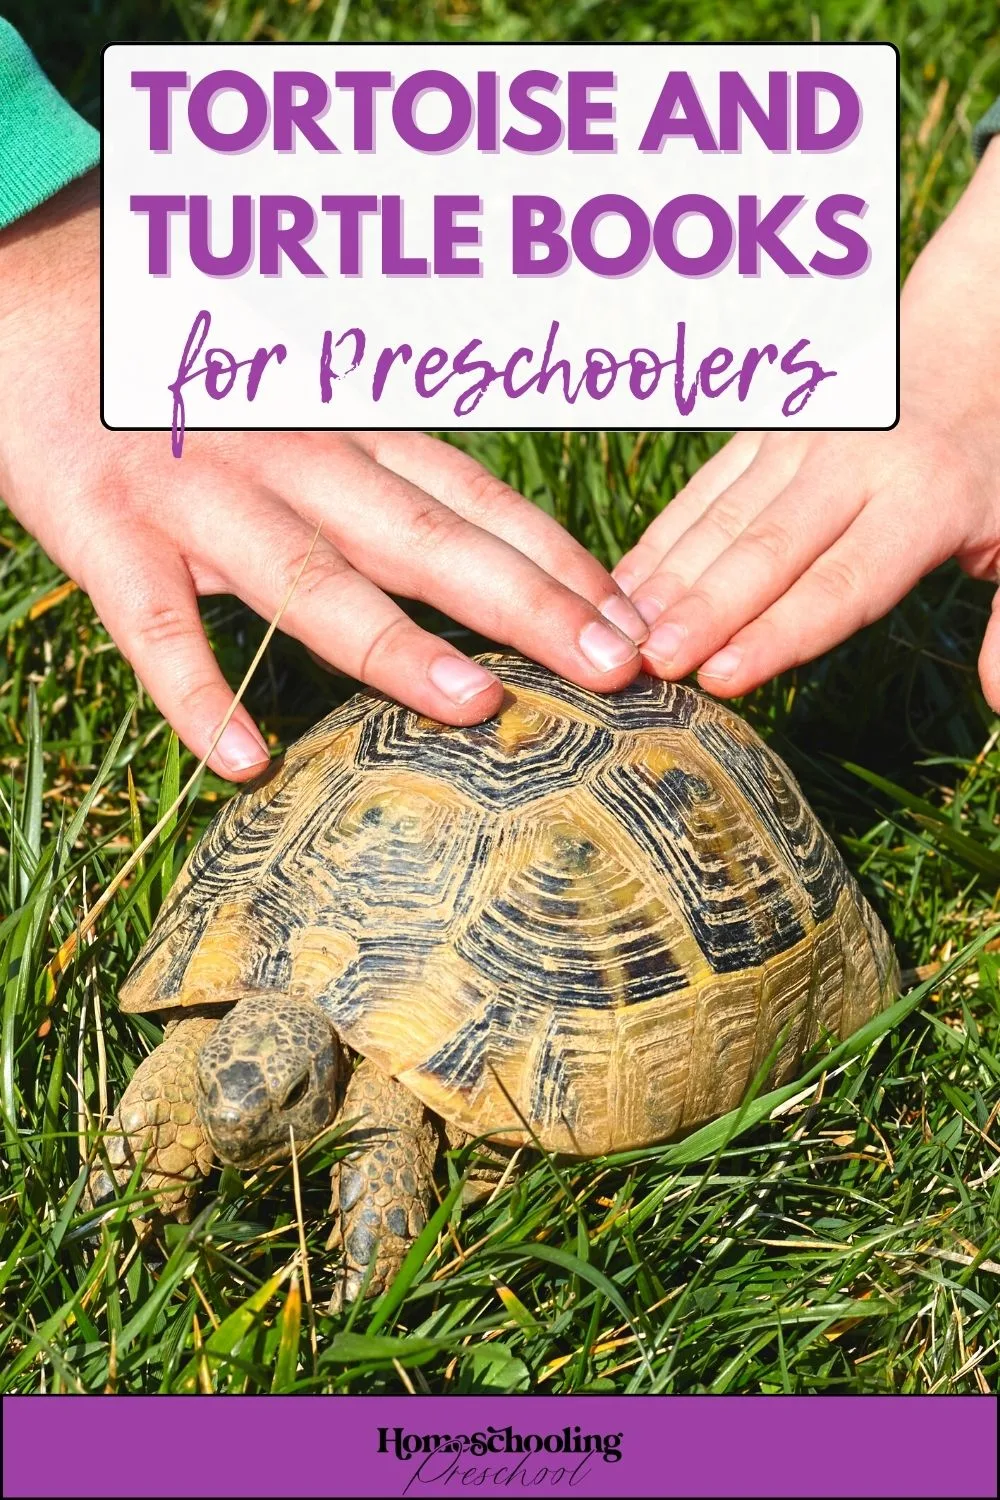 Tortoise and Turtle Books for Preschoolers